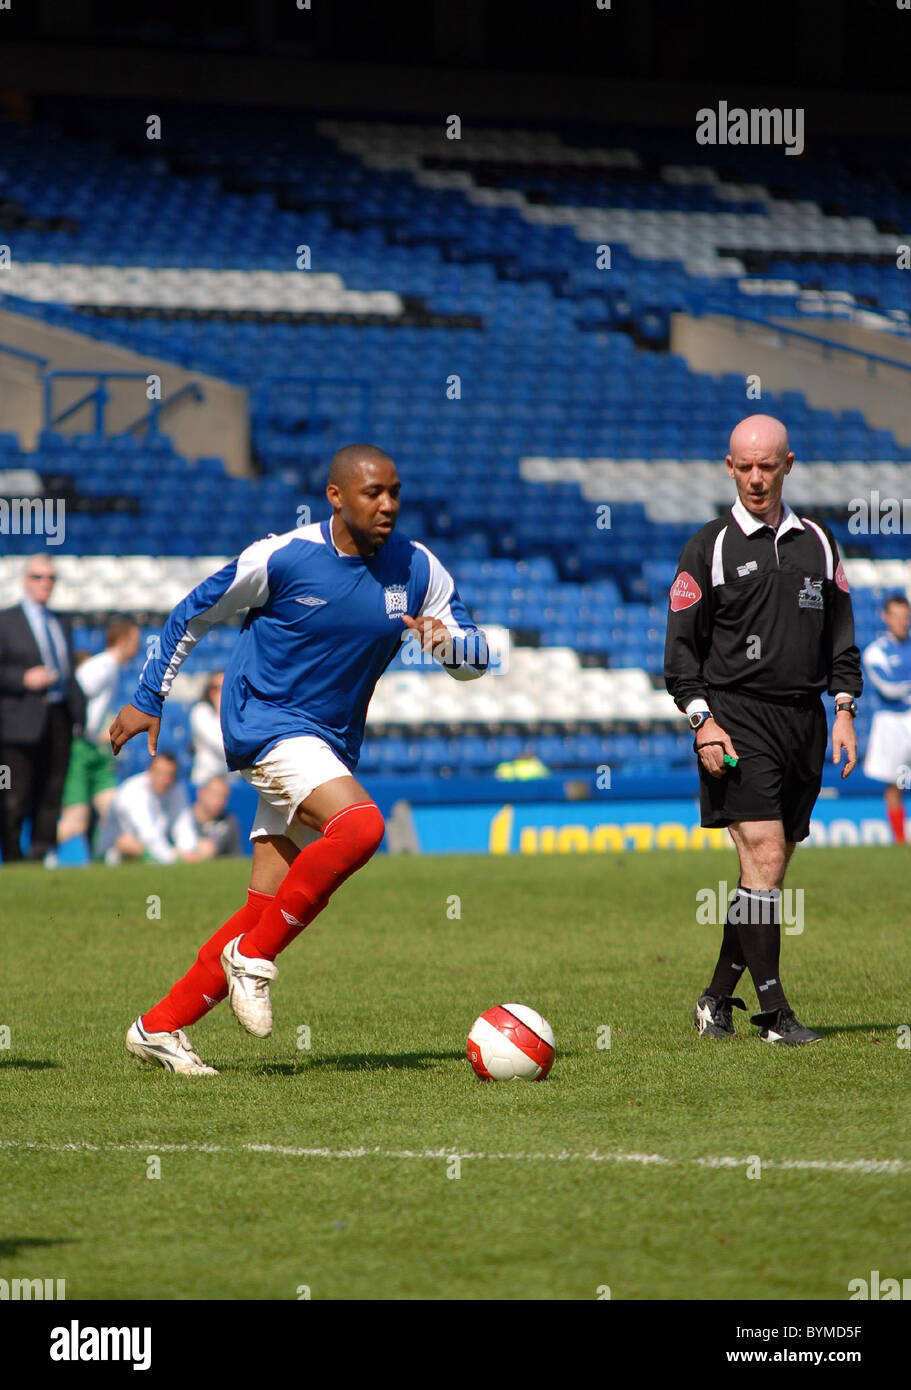 Darren Campbell Nicky's Whisper Challenge Trophy Football Match at Chelsea  Football Club London, England - 24.05.07 Stock Photo - Alamy